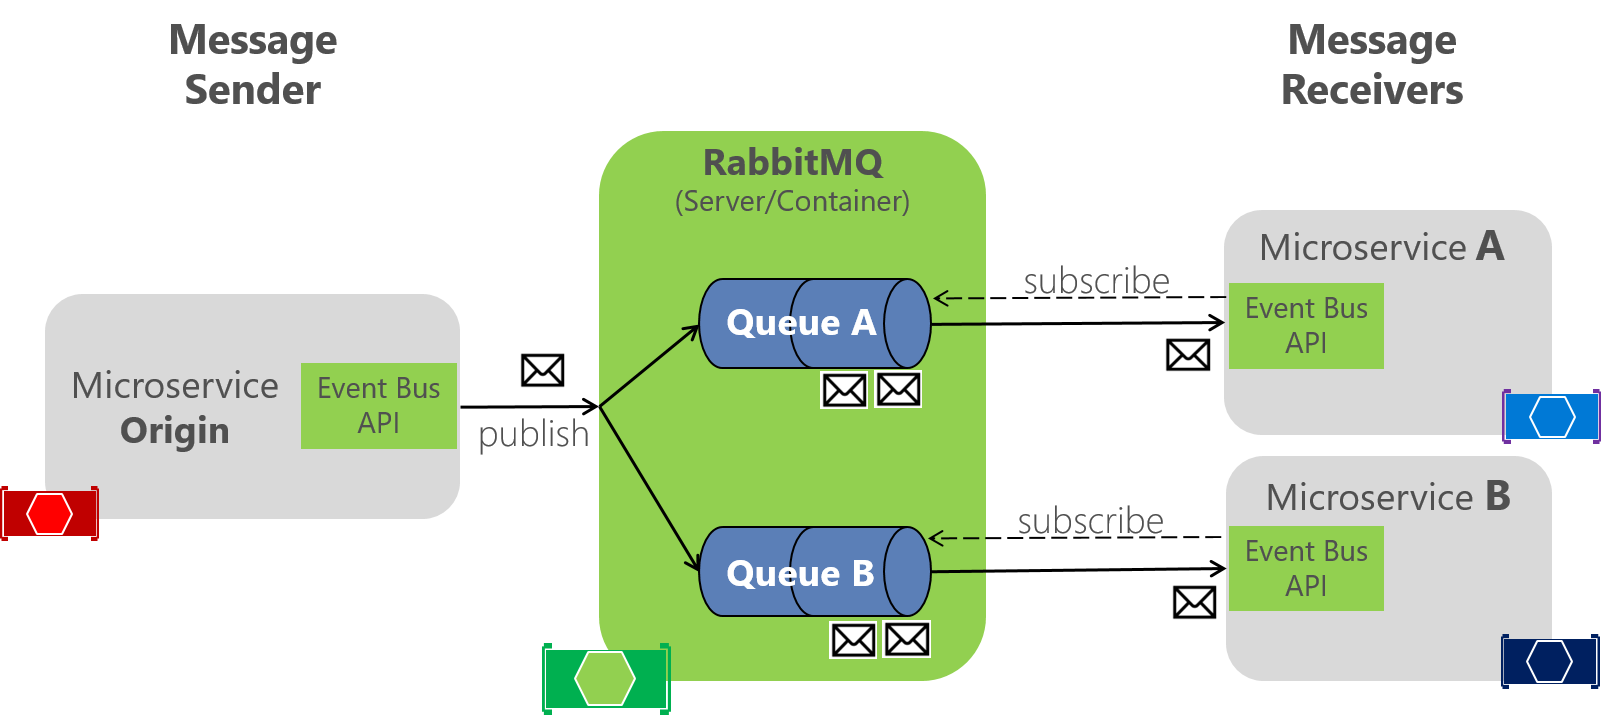 Diagram showing RabbitMQ between message sender and message receiver.